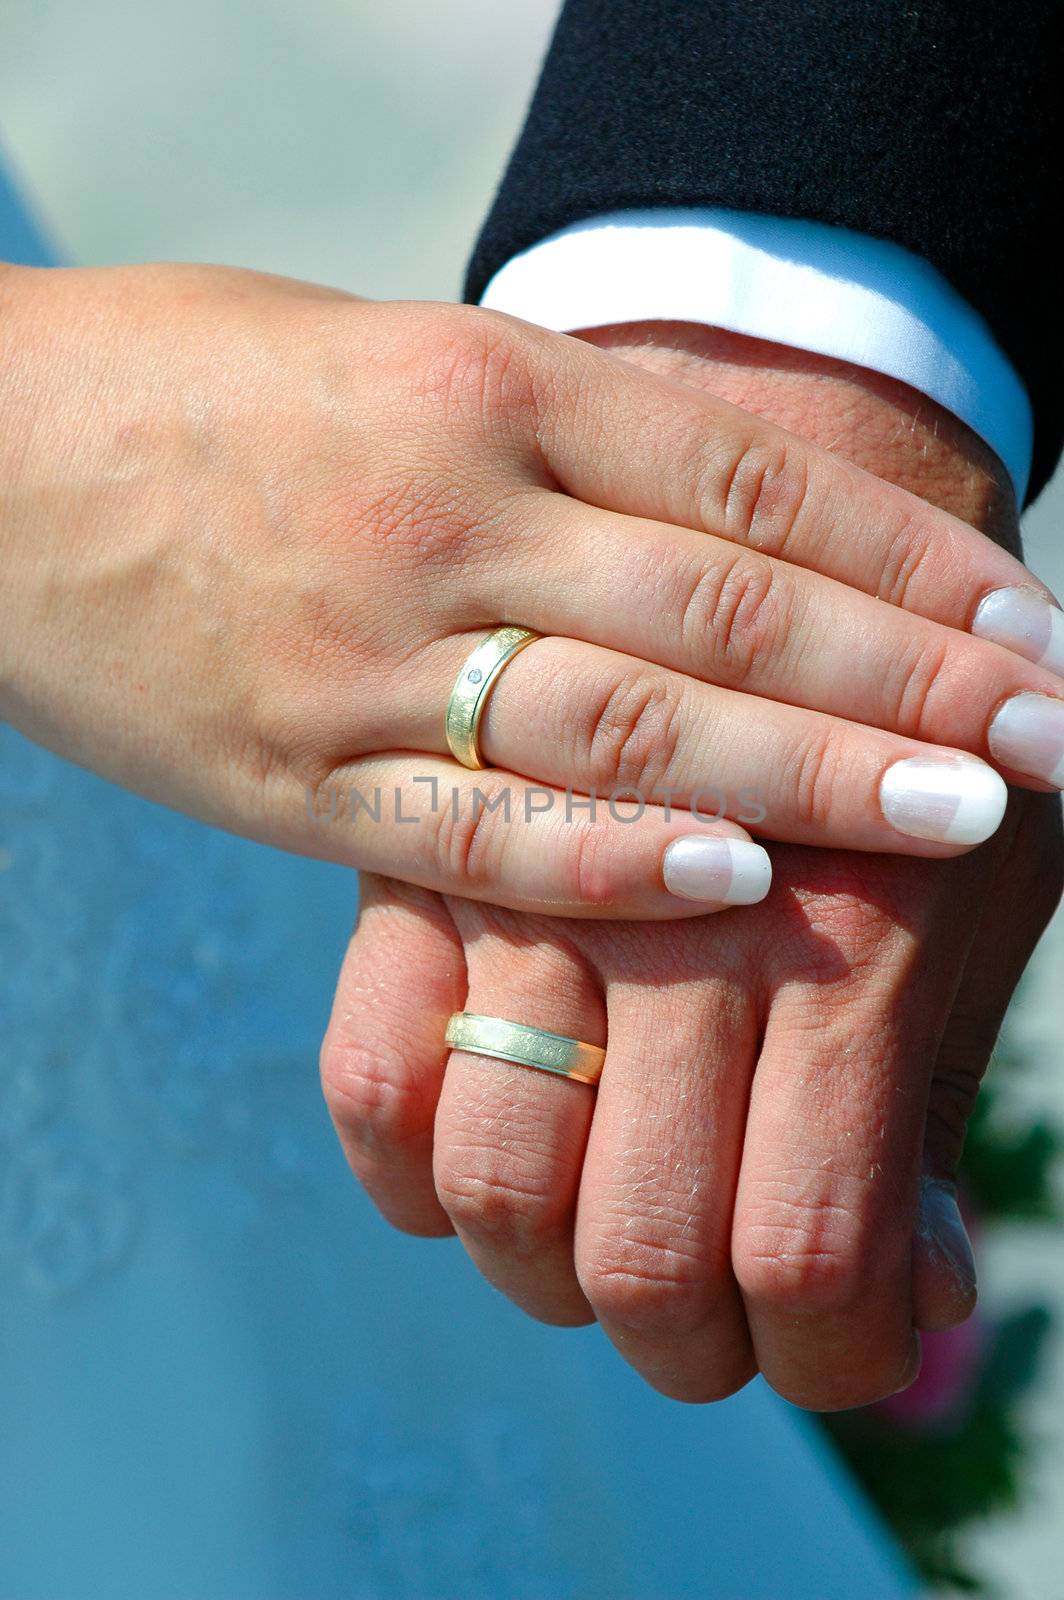 Hands and Wedding rings